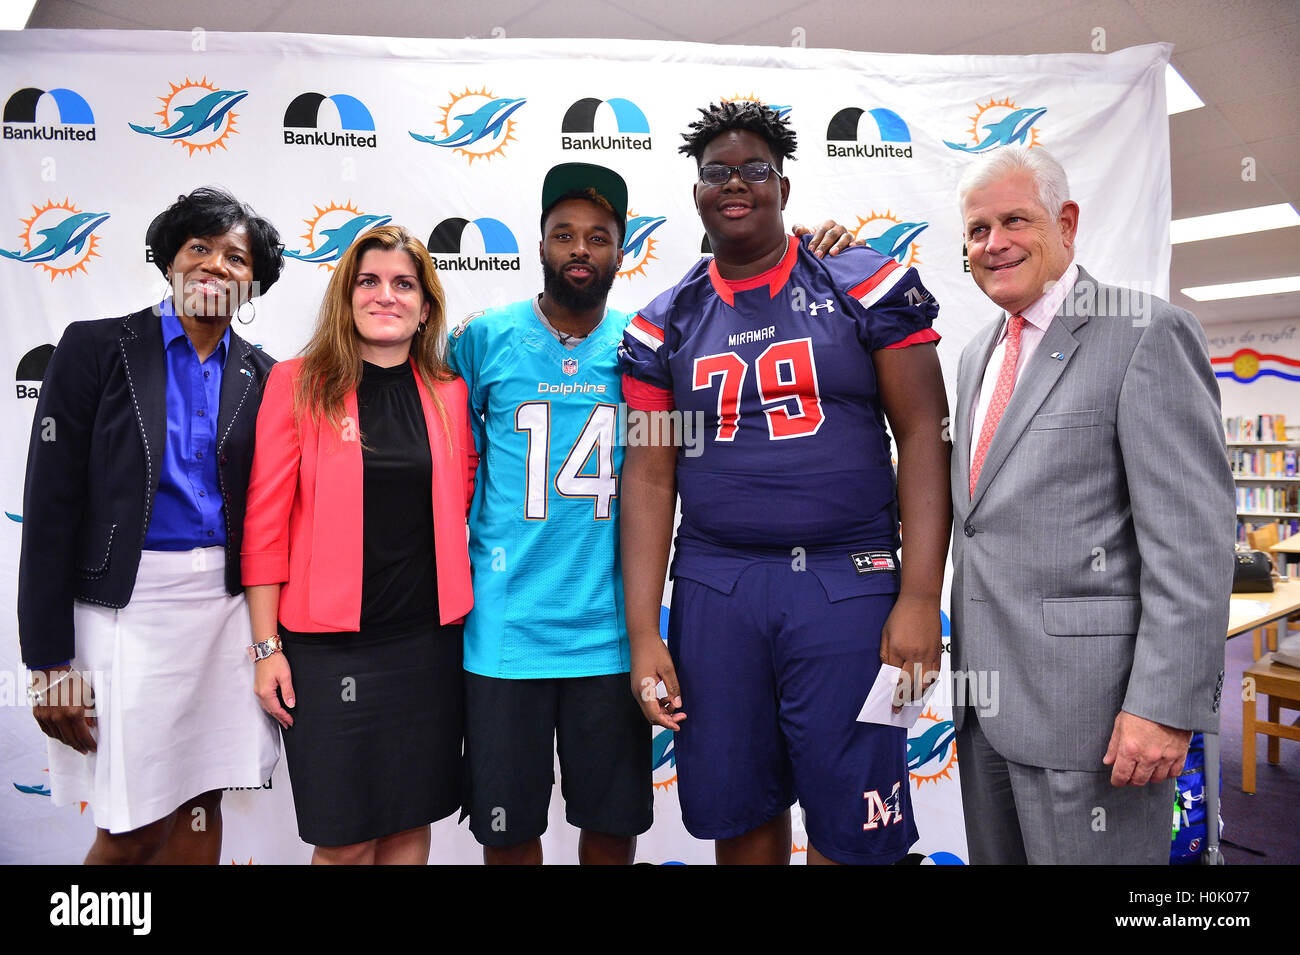 MIAMI, FL - SEPTEMBER 20: BankUnited Vice President of Community Development & Outreach Katrina Wright, Miramar High School Principal Maria Formoso, Miami Dolphins Wide Receiver (#14) Jarvis Landry, Stephen Gordon and BankUnited Senior Executive Vice President Gerry Litrento surprise the Miramar Patriots varsity football team prior to the team's practice as part of the 4 Downs for Finance financial literacy program sponsored by BankUnited. Landry share his thoughts on the importance of financial literacy at Miramar High School Media Center on September 20, 2016 in Miramar, Florida. Credit: MPI Stock Photo